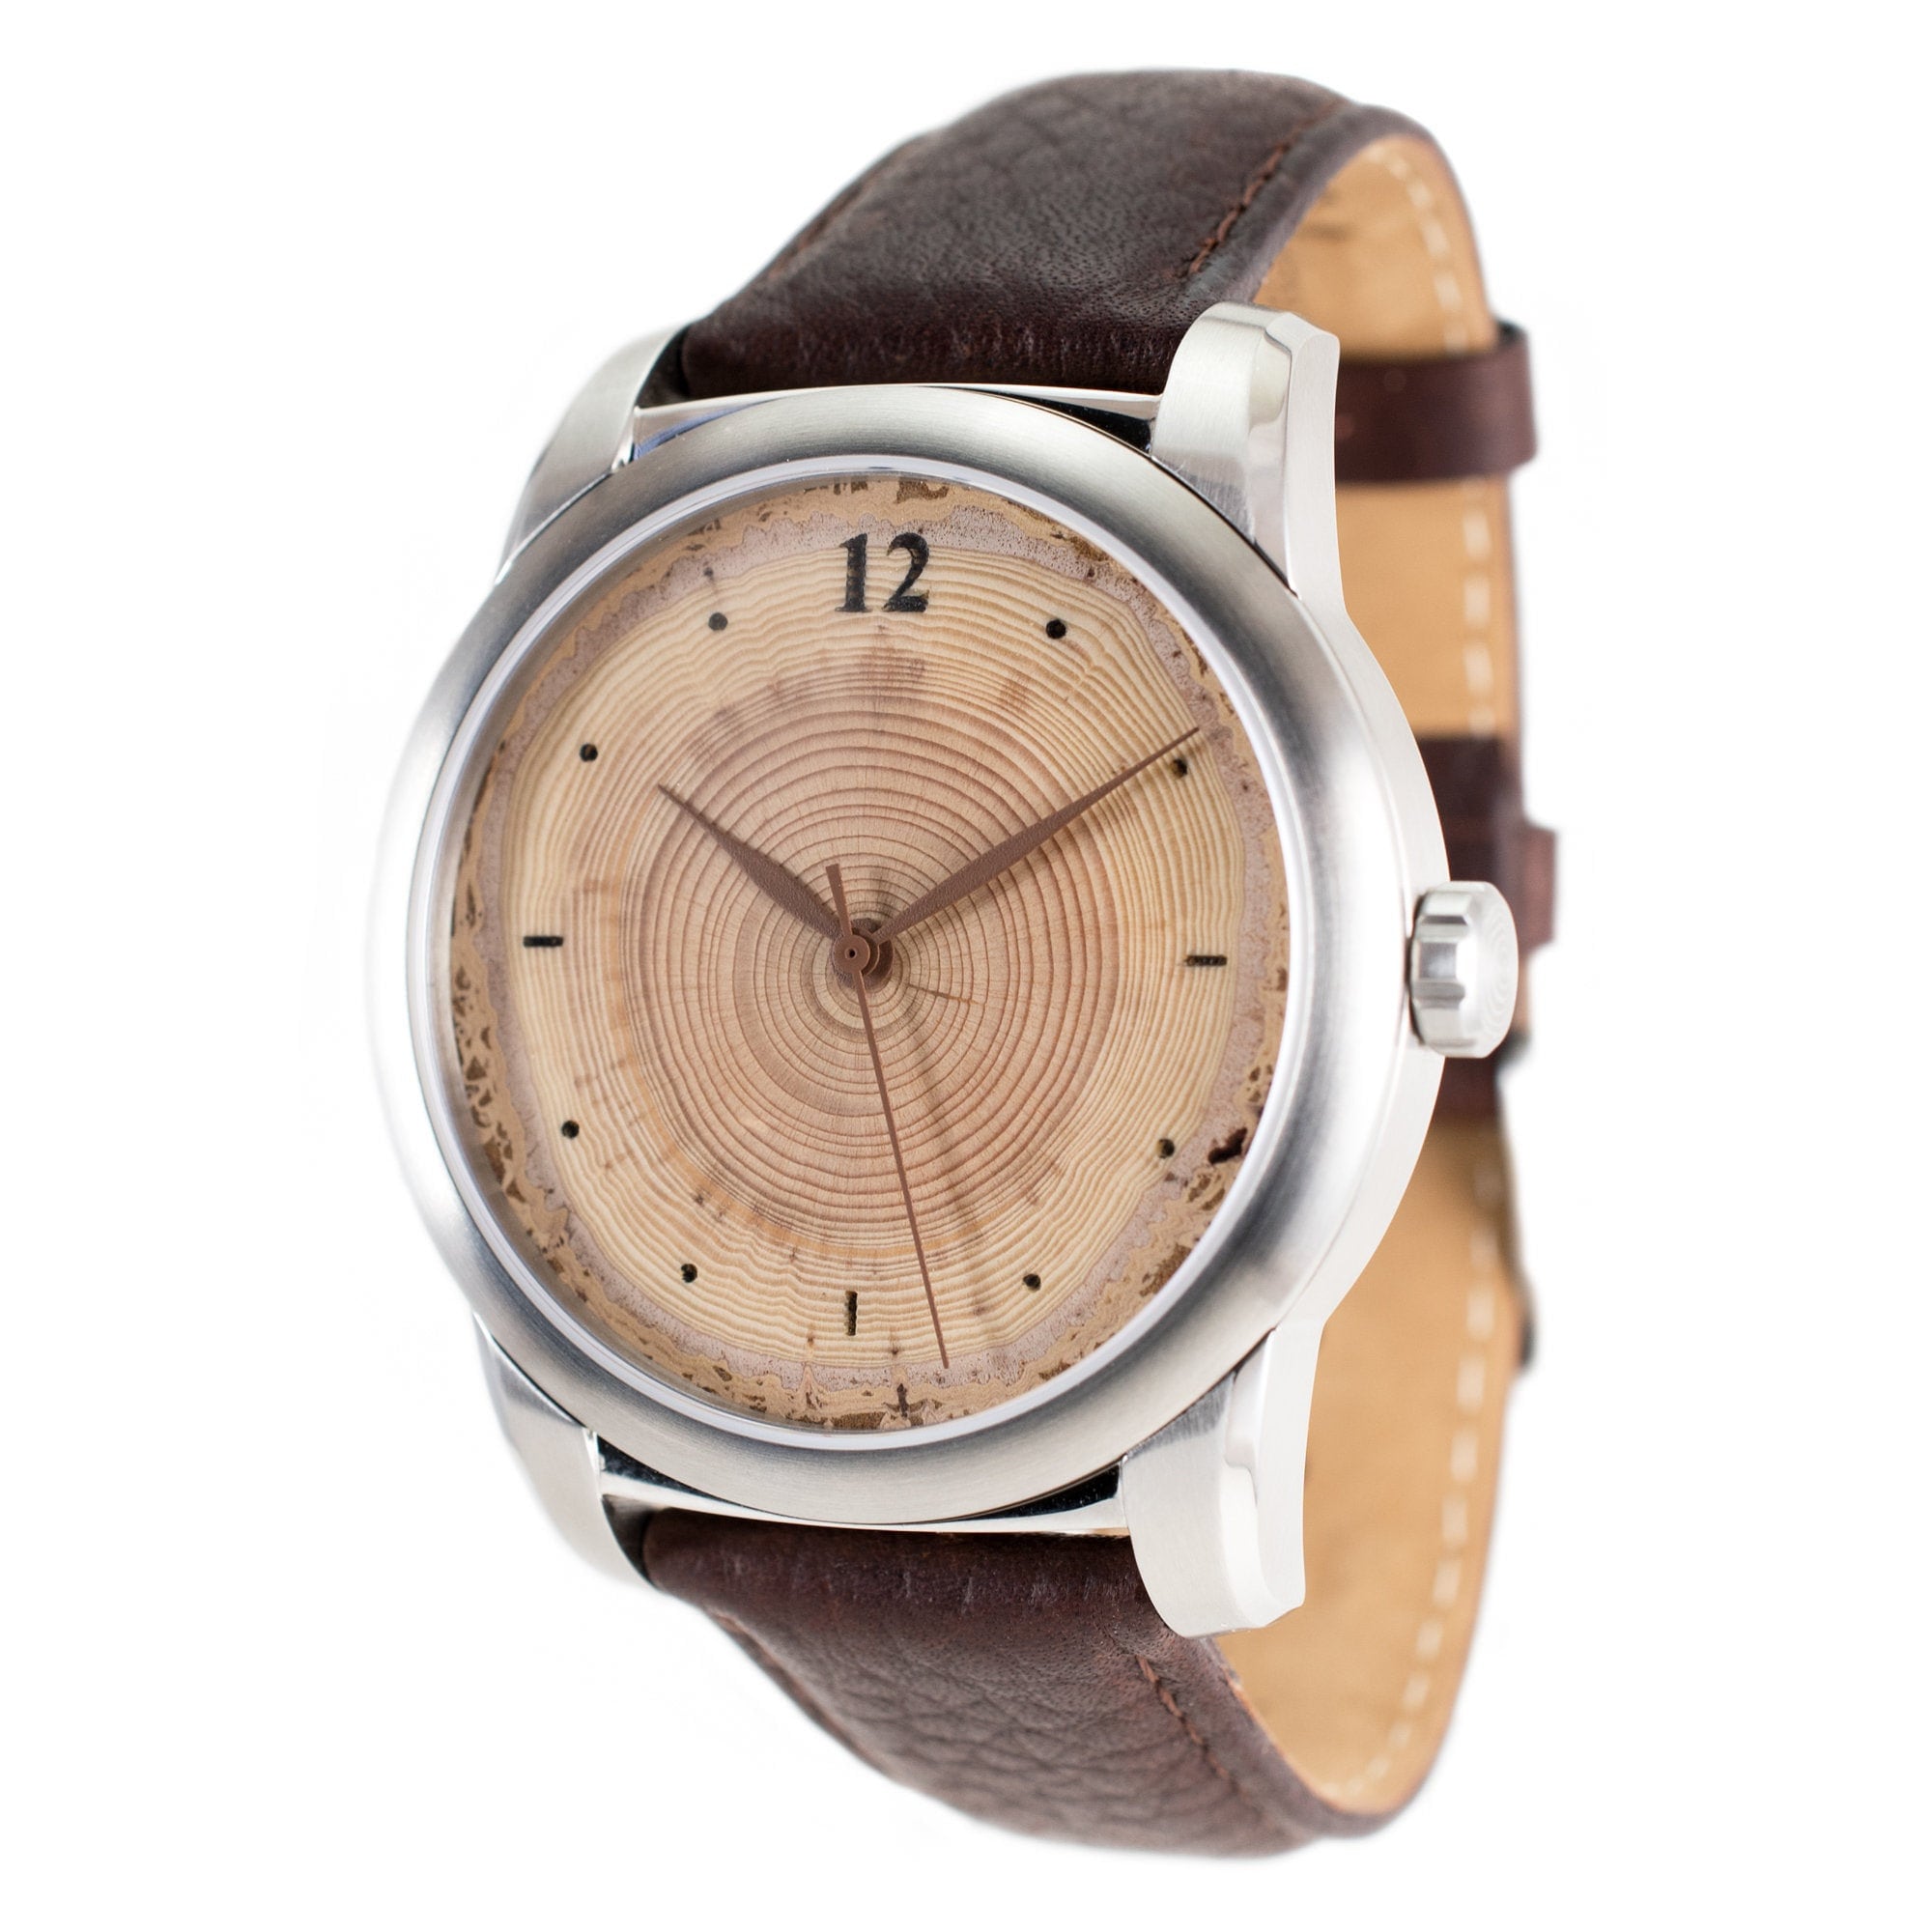 Manly watch for him. Coolest new watch. Custom wood watch.